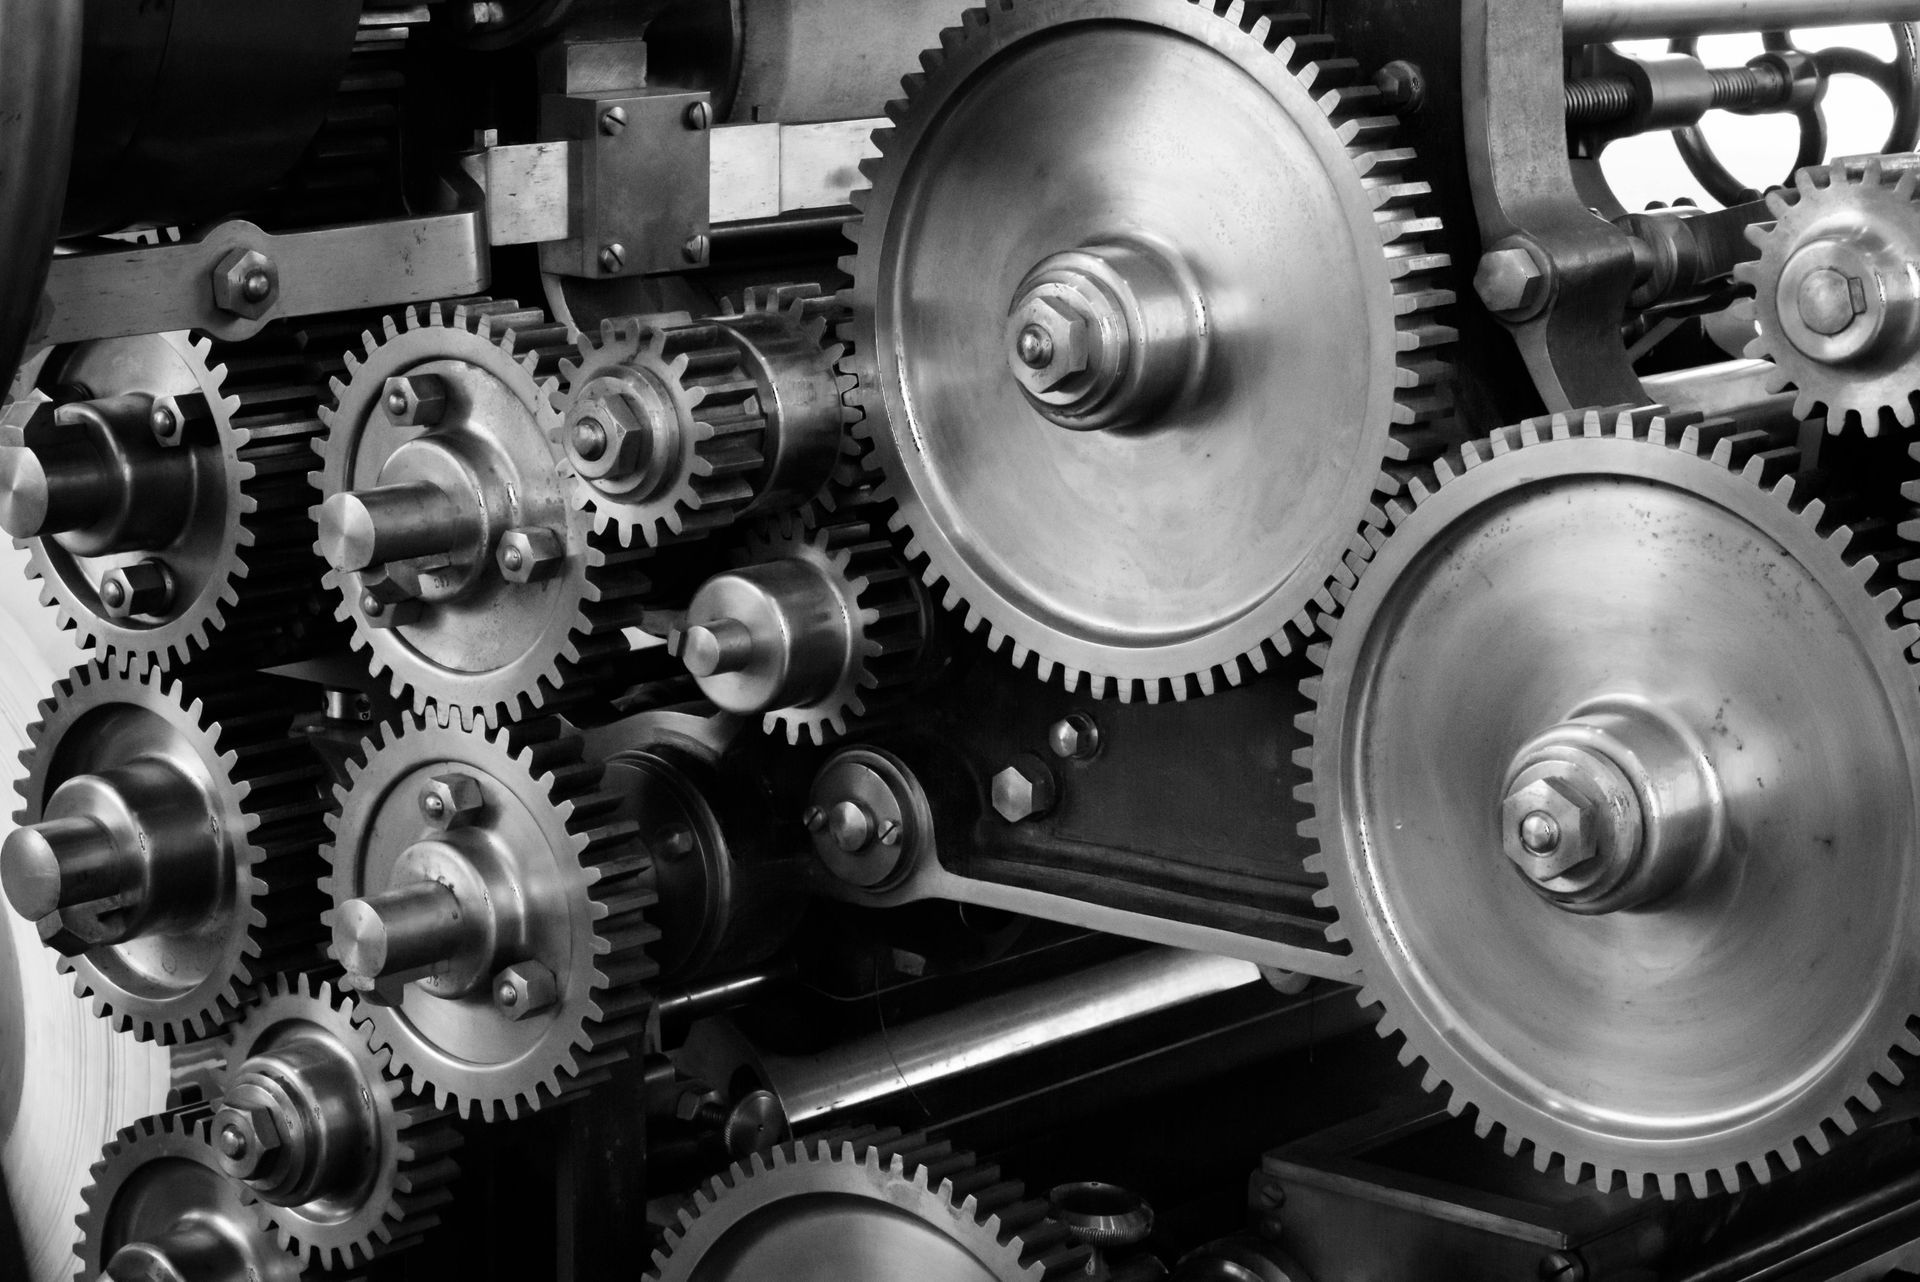 A black and white photo of a machine with lots of gears.